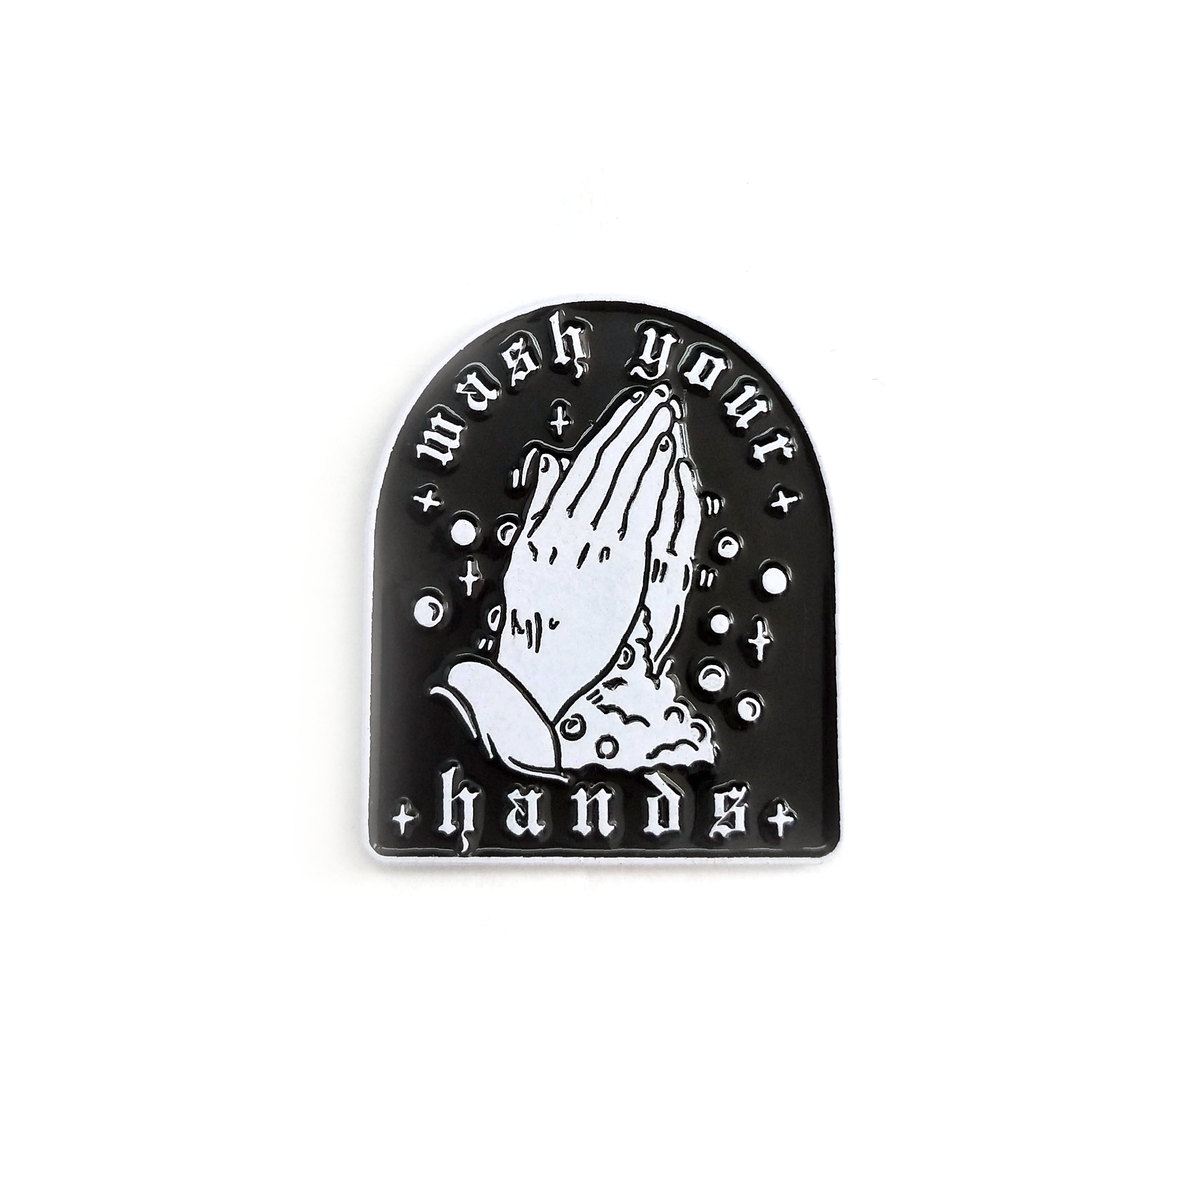 Wash Your Hands Enamel Pin